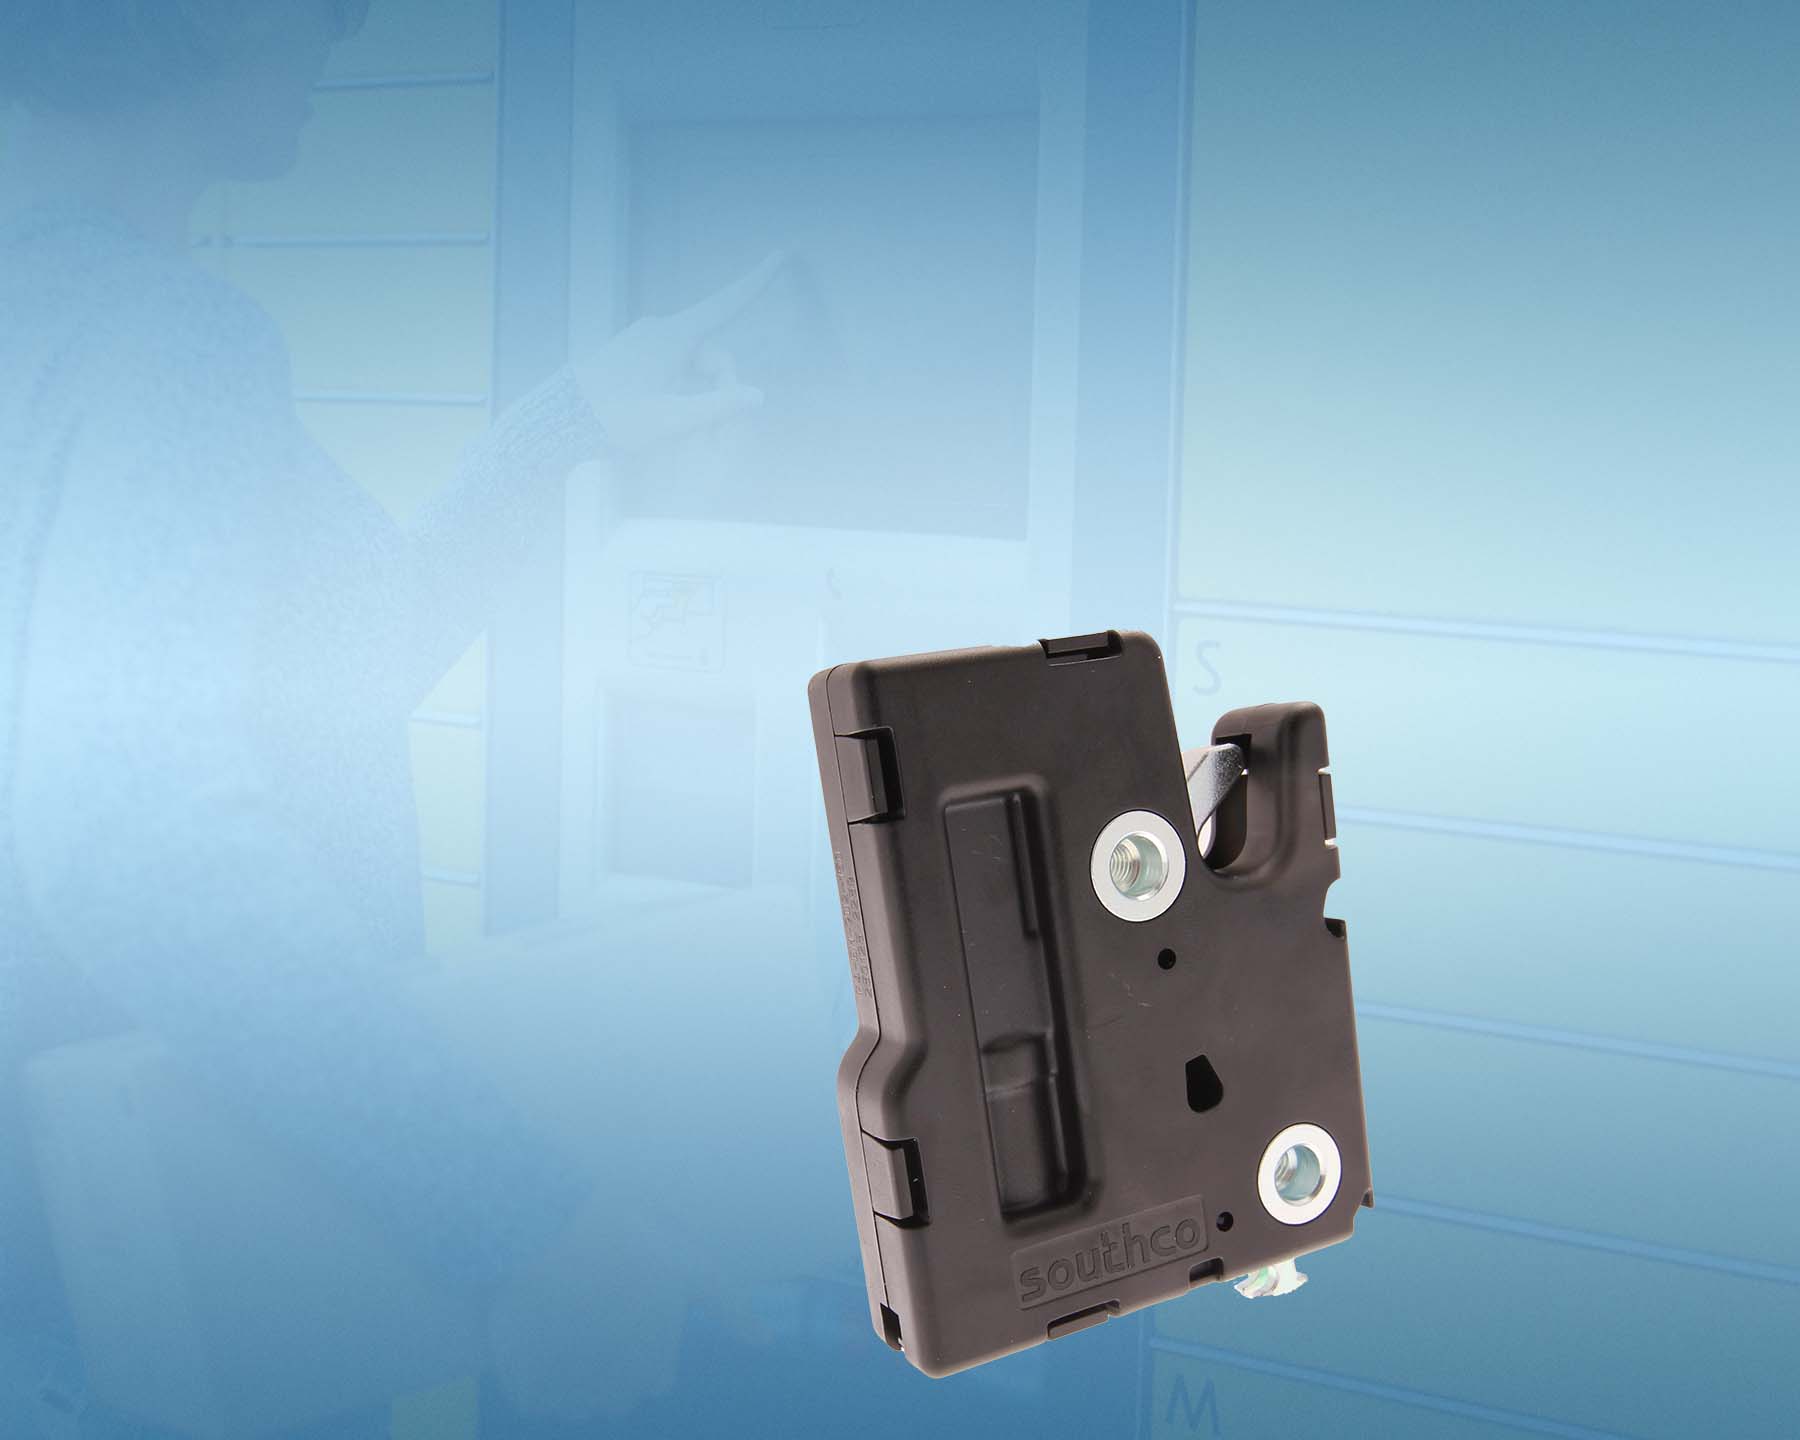 Electric Lock Technology for All Industries: Introducing the R4-EM-9 Electronic Rotary Lock System